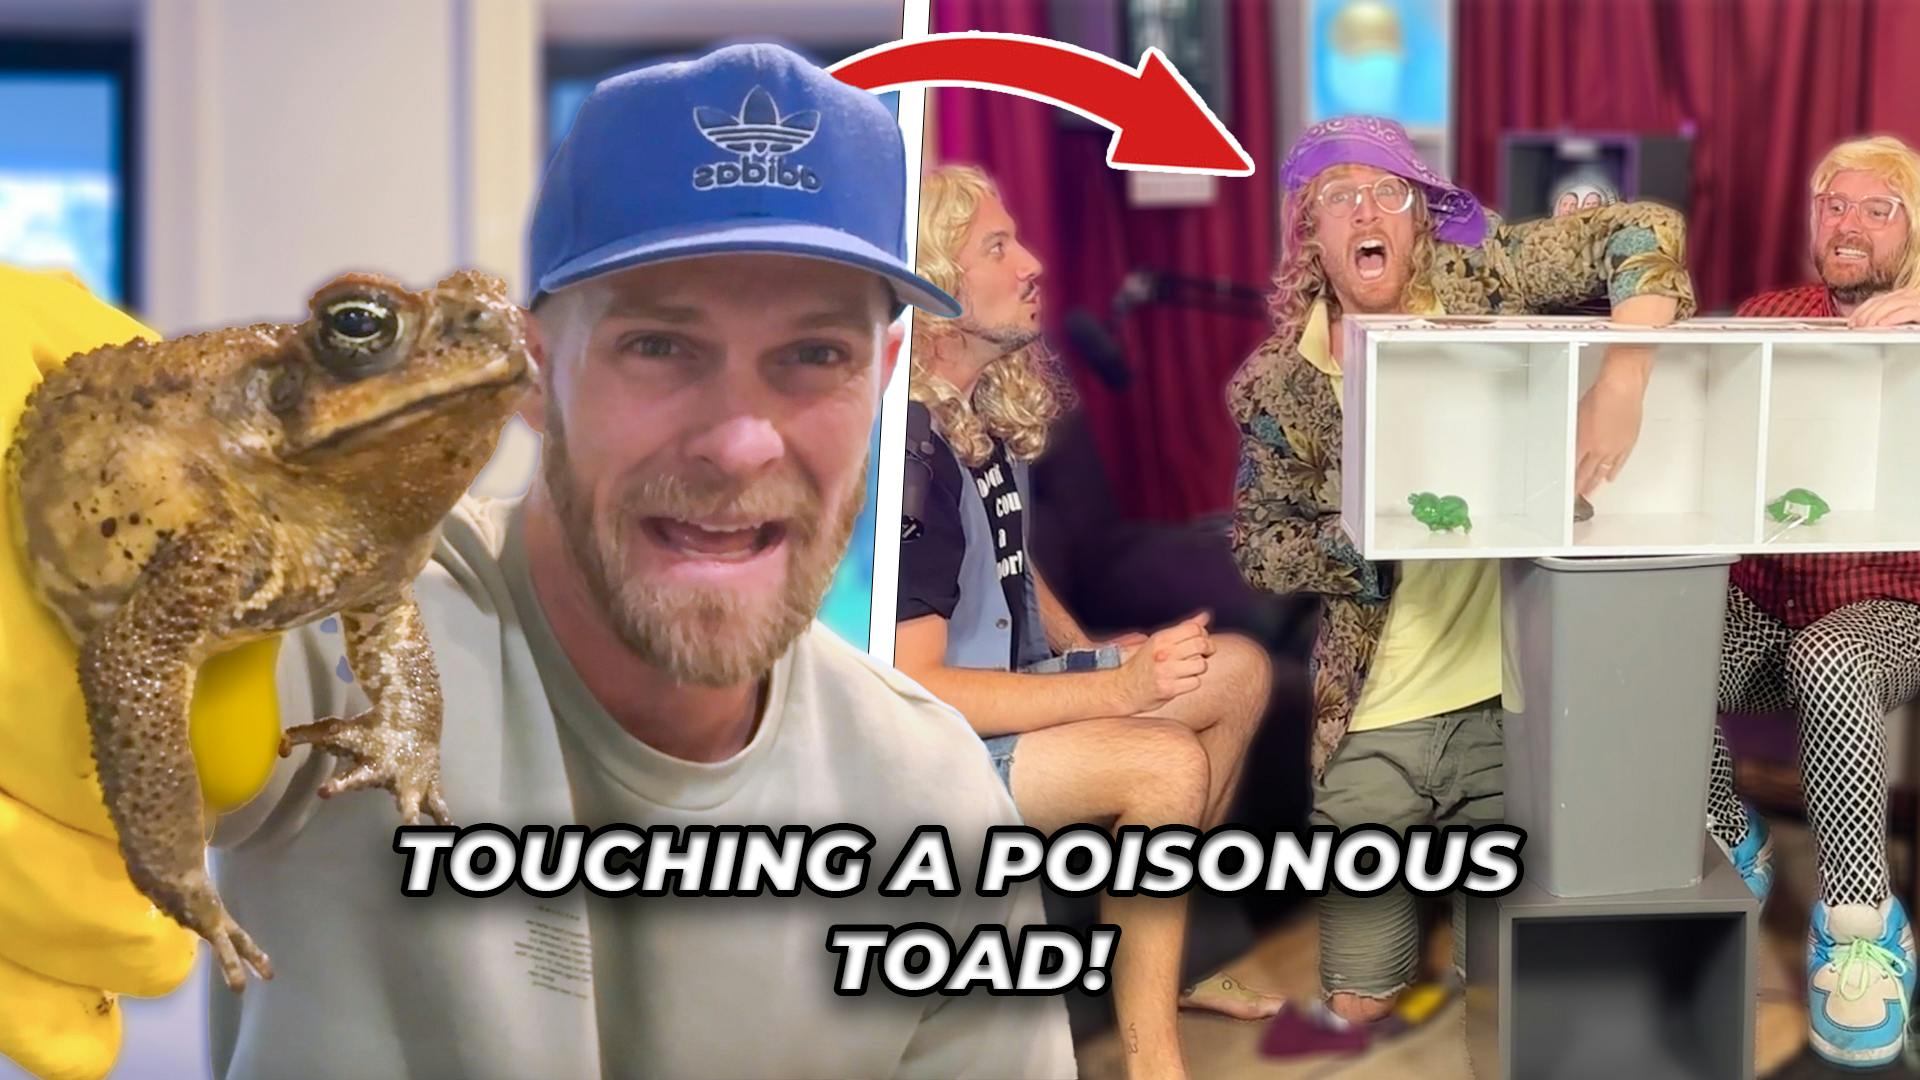 Do Woman Belong In The Kitchen? And Touching A Poisonous Toad (Season 6, Episode 9)